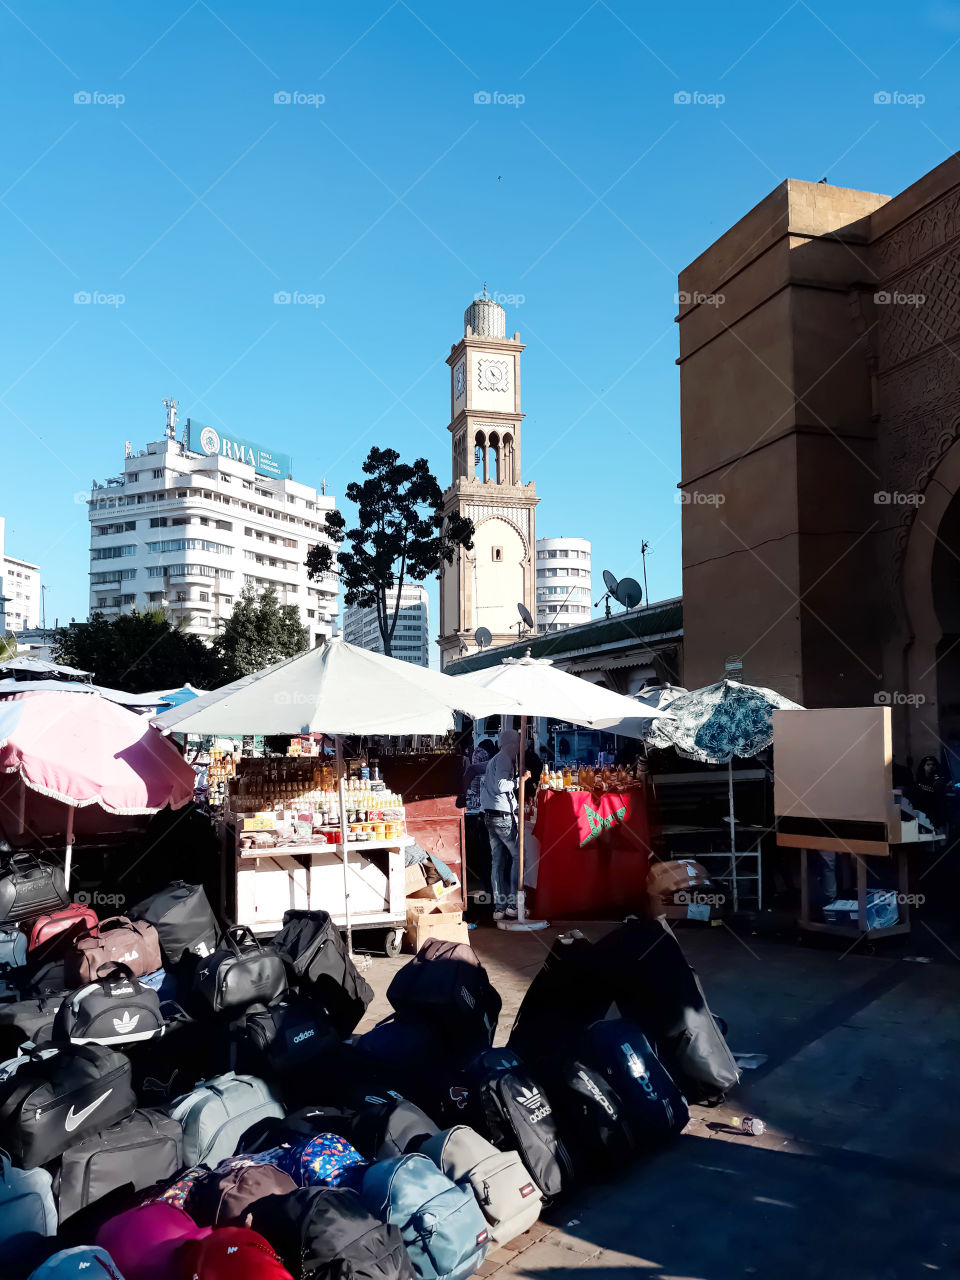 Bab Marrakech in Casablanca, Morocco. Where there is an old market contains various traditional products for sale.